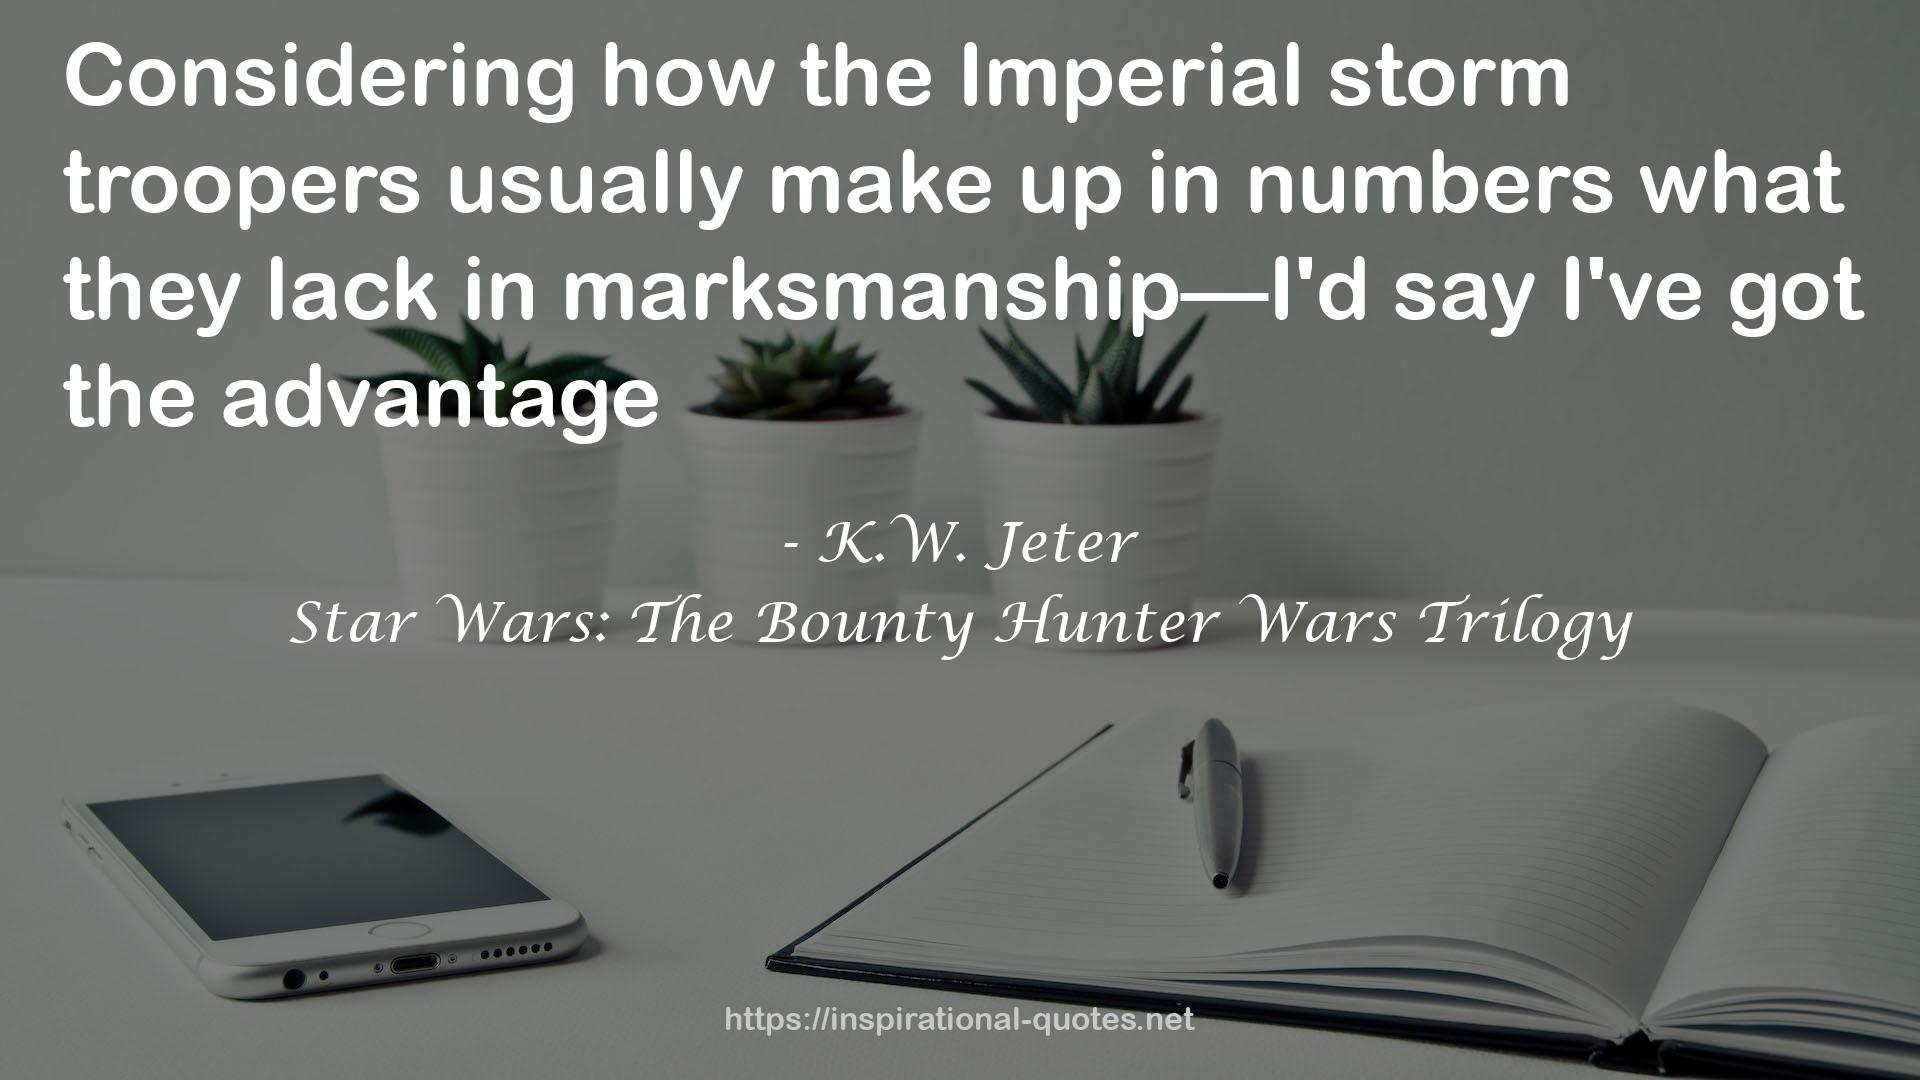 Star Wars: The Bounty Hunter Wars Trilogy QUOTES